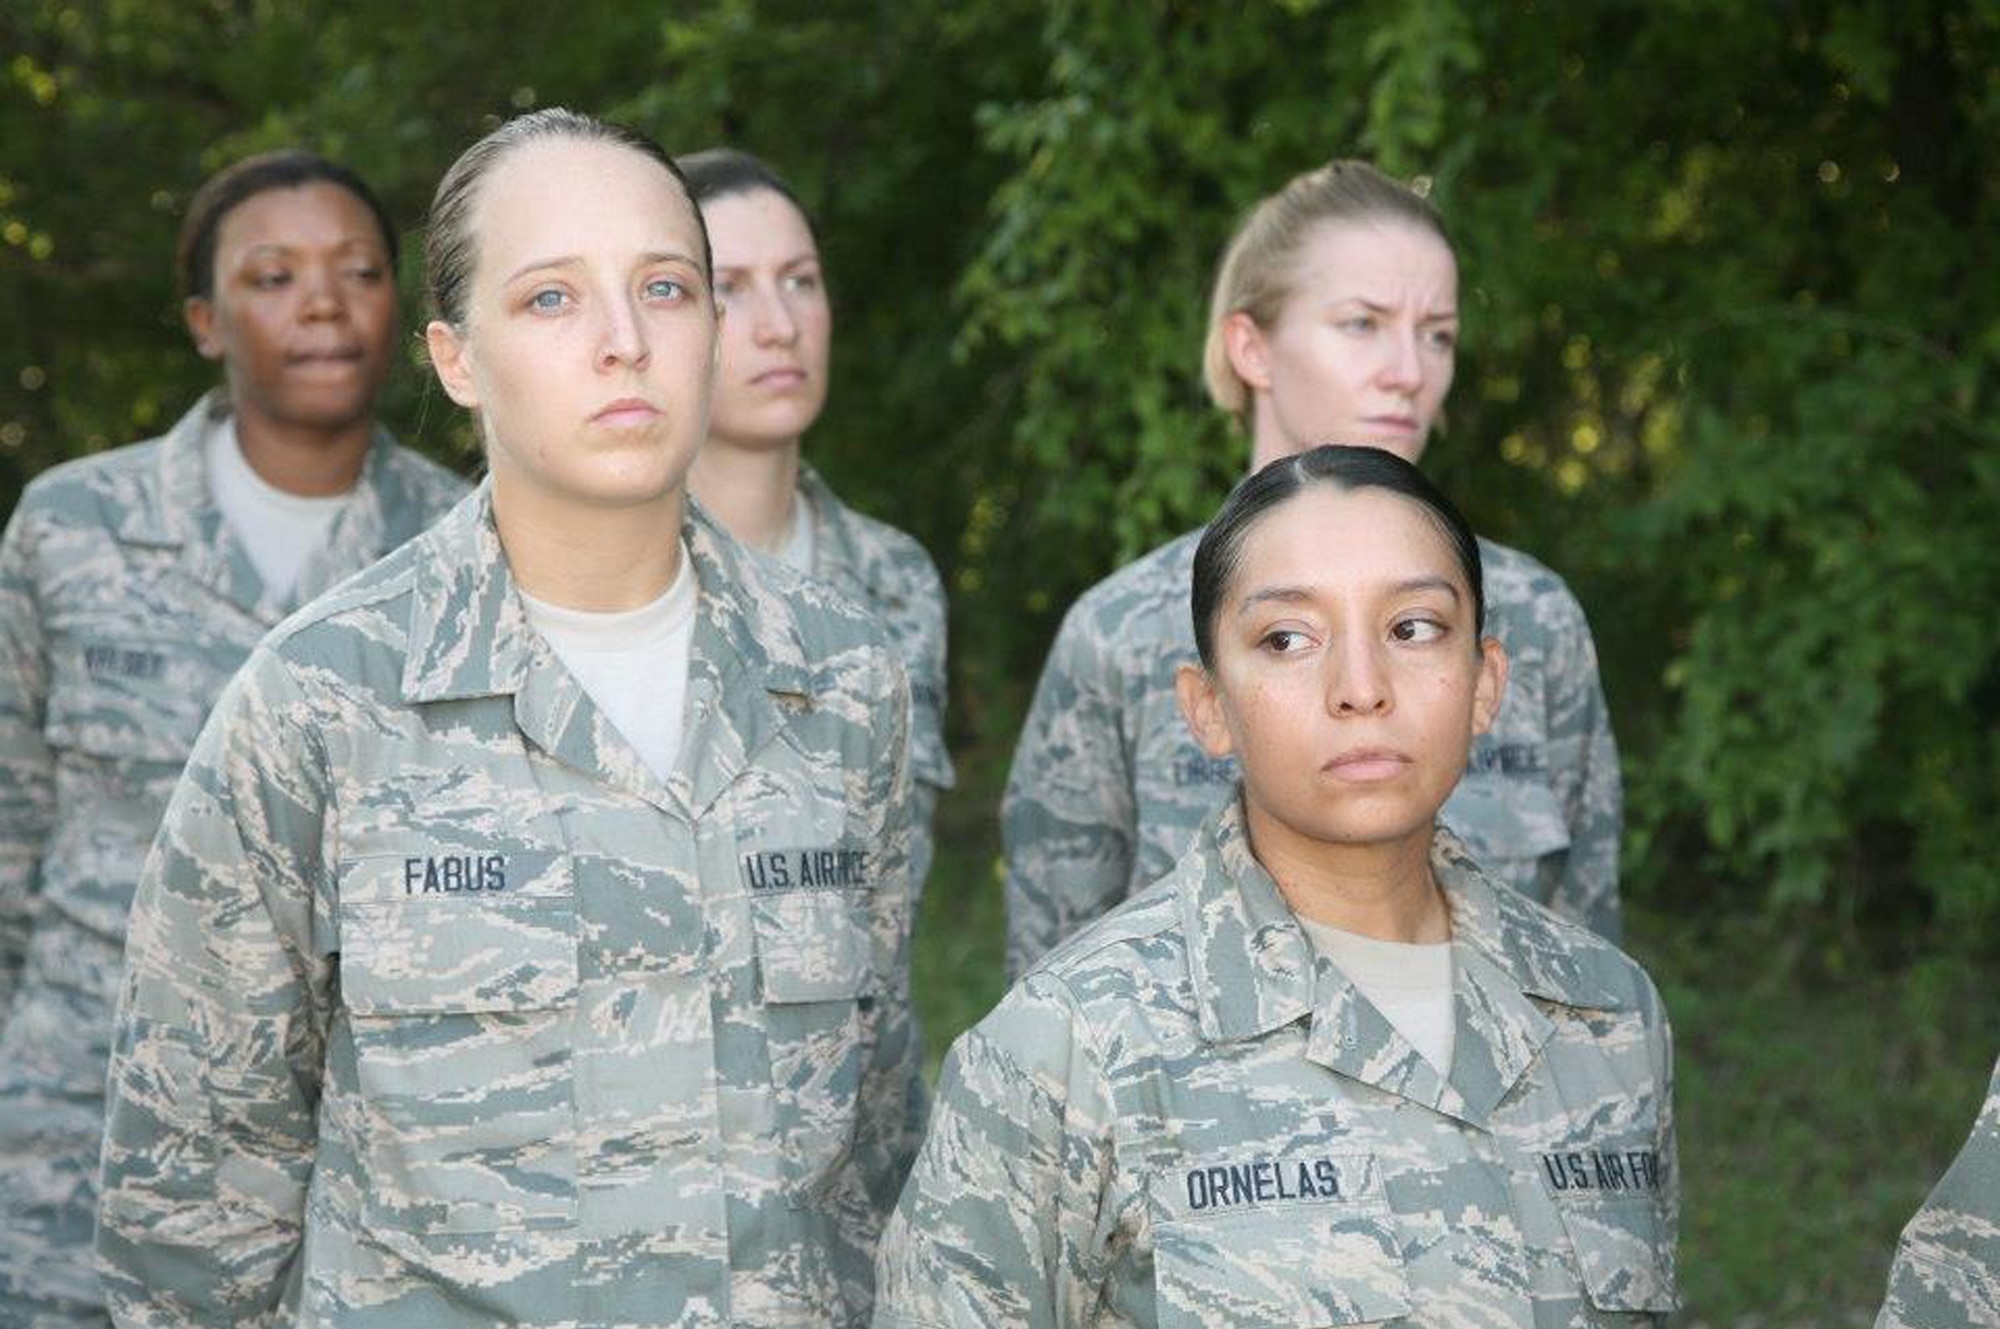 Photos appearing on the USAF BMT facebook page feature some 171st Air Refueling Wing recruits Alyssa Dunlap and Clarissa Fabus.